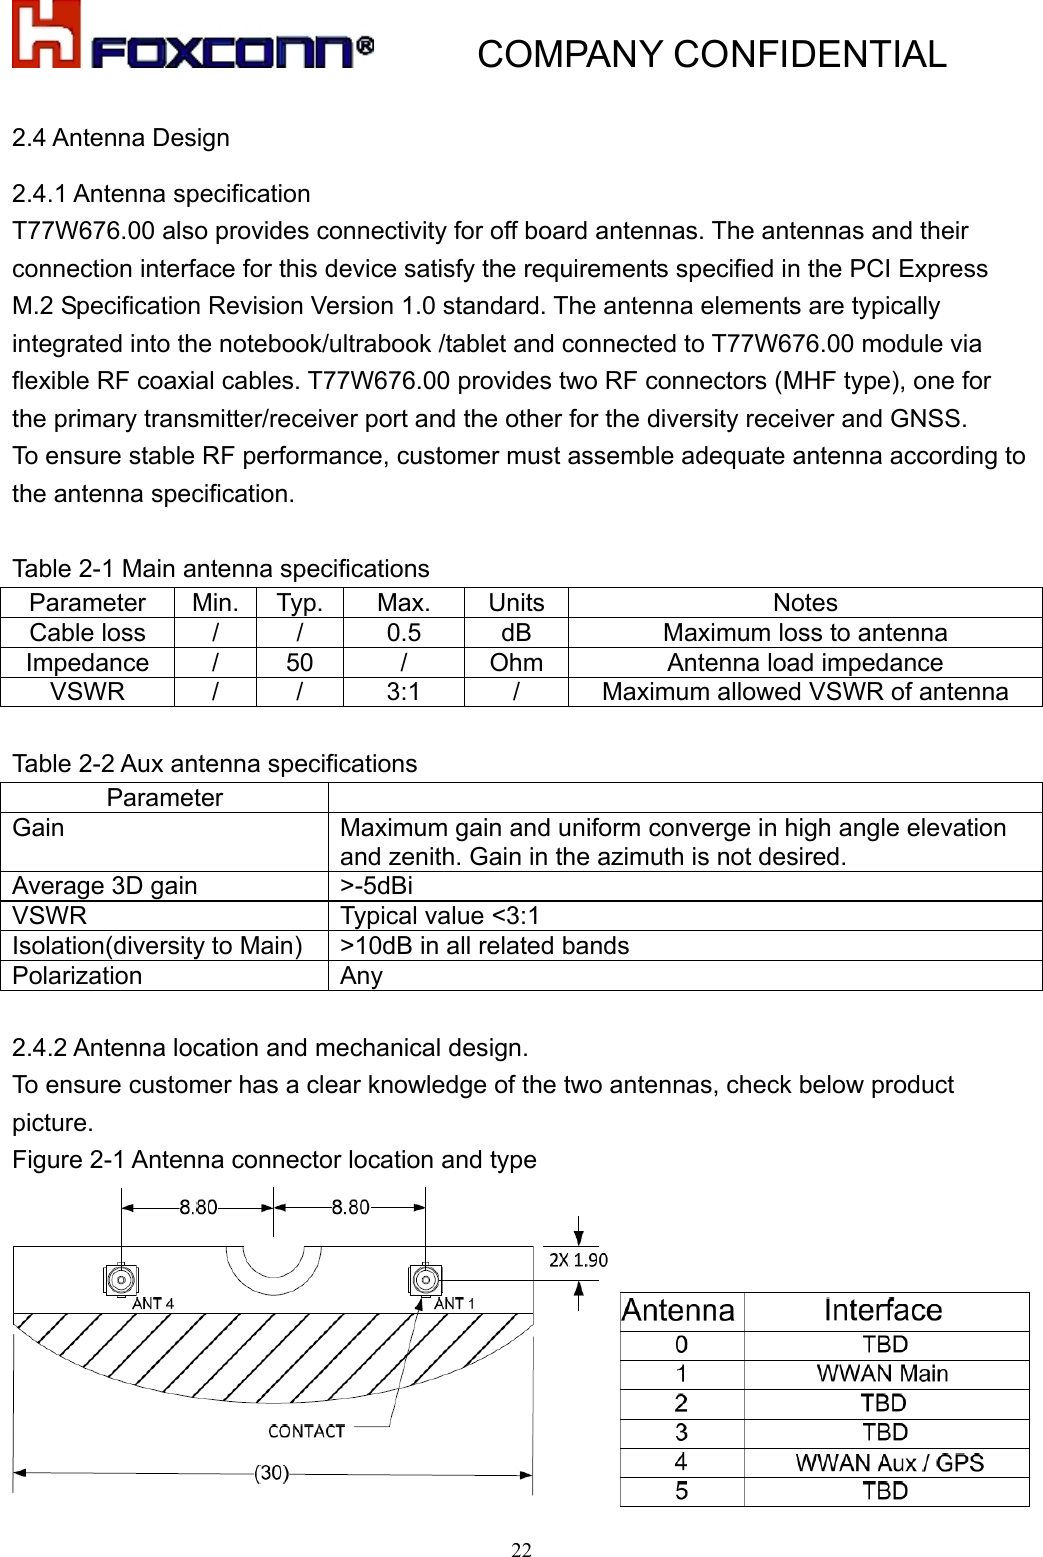           COMPANY CONFIDENTIAL   222.4 Antenna Design 2.4.1 Antenna specification T77W676.00 also provides connectivity for off board antennas. The antennas and their connection interface for this device satisfy the requirements specified in the PCI Express M.2 Specification Revision Version 1.0 standard. The antenna elements are typically integrated into the notebook/ultrabook /tablet and connected to T77W676.00 module via flexible RF coaxial cables. T77W676.00 provides two RF connectors (MHF type), one for the primary transmitter/receiver port and the other for the diversity receiver and GNSS.   To ensure stable RF performance, customer must assemble adequate antenna according to the antenna specification.  Table 2-1 Main antenna specifications Parameter Min. Typ.  Max.  Units  Notes Cable loss  /  /  0.5  dB  Maximum loss to antenna Impedance  /  50  /  Ohm  Antenna load impedance VSWR  /  /  3:1  /  Maximum allowed VSWR of antenna  Table 2-2 Aux antenna specifications Parameter  Gain  Maximum gain and uniform converge in high angle elevation and zenith. Gain in the azimuth is not desired. Average 3D gain  &gt;-5dBi VSWR  Typical value &lt;3:1 Isolation(diversity to Main)  &gt;10dB in all related bands Polarization Any  2.4.2 Antenna location and mechanical design.   To ensure customer has a clear knowledge of the two antennas, check below product picture. Figure 2-1 Antenna connector location and type  